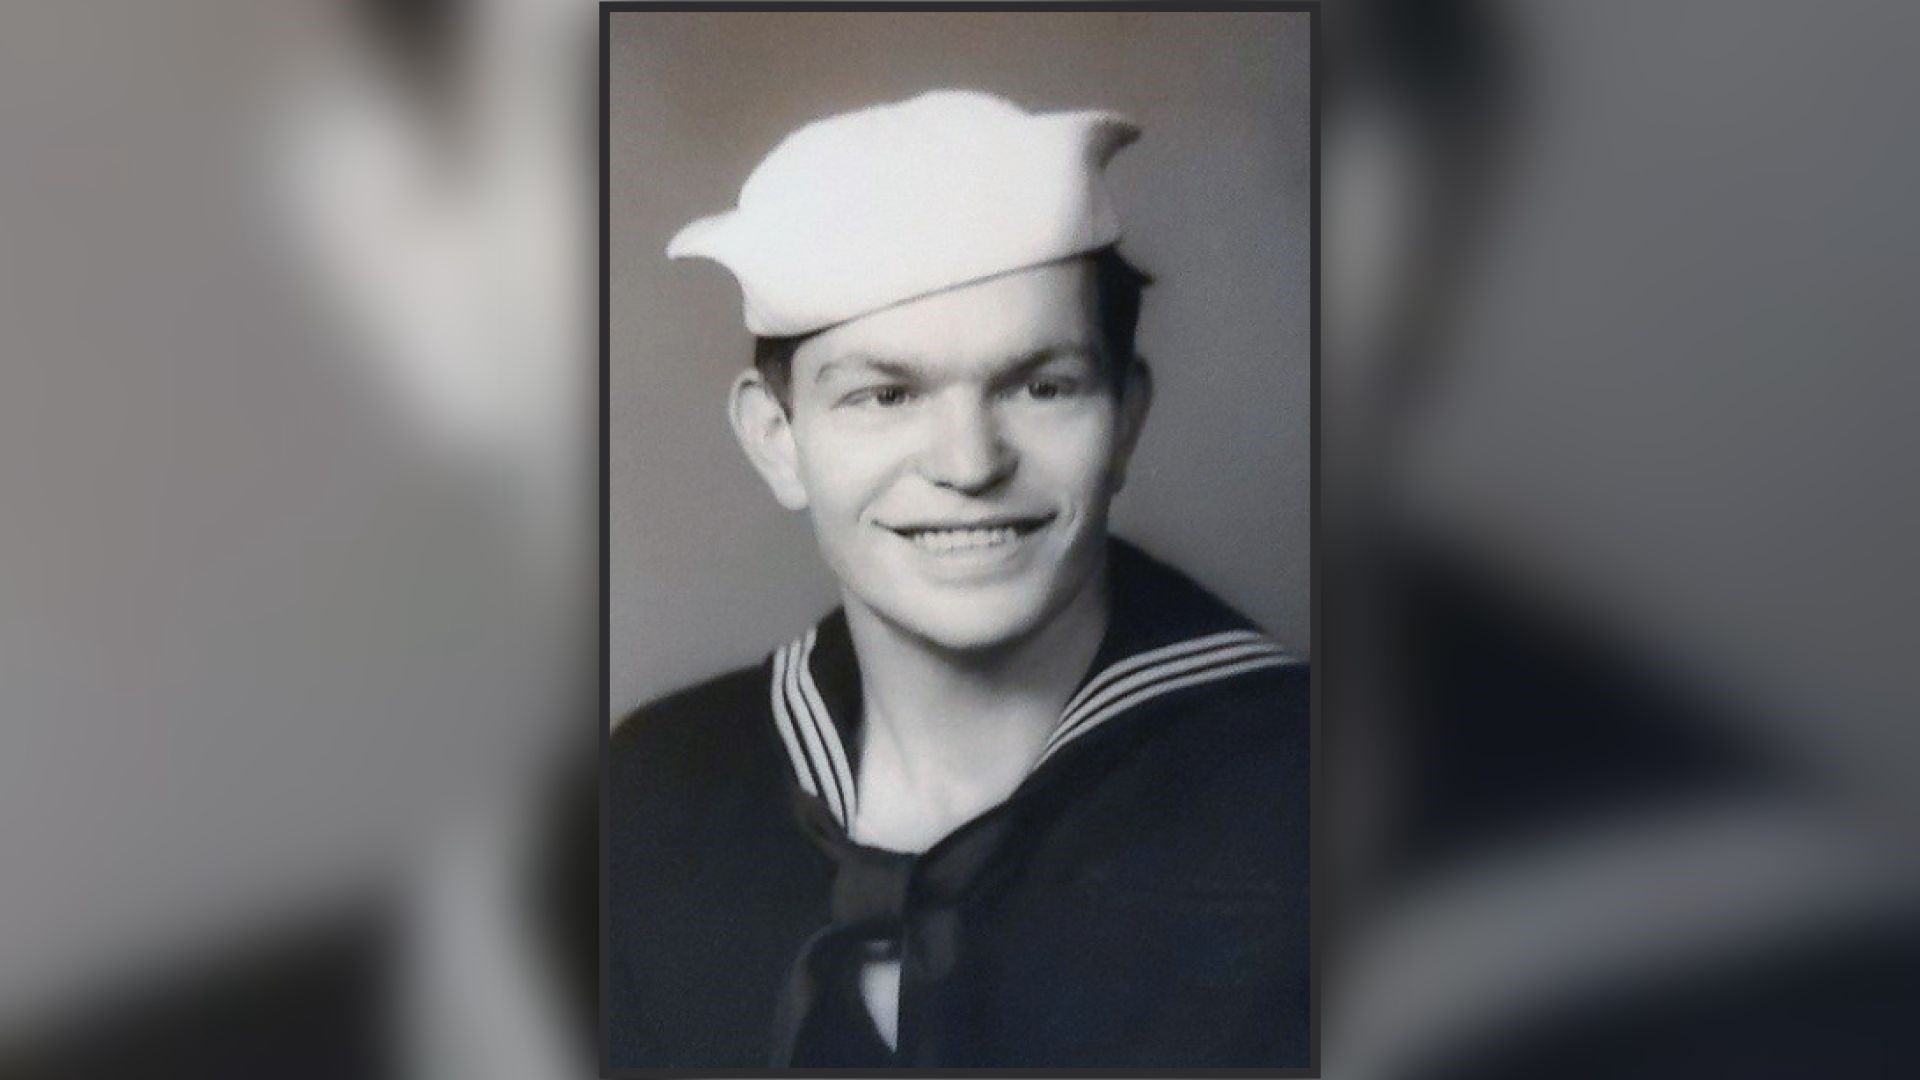 Raymond Boynton, a sailor from Grandville, will be laid to rest at the National Memorial Cemetery of the Pacific after more than 80 years.